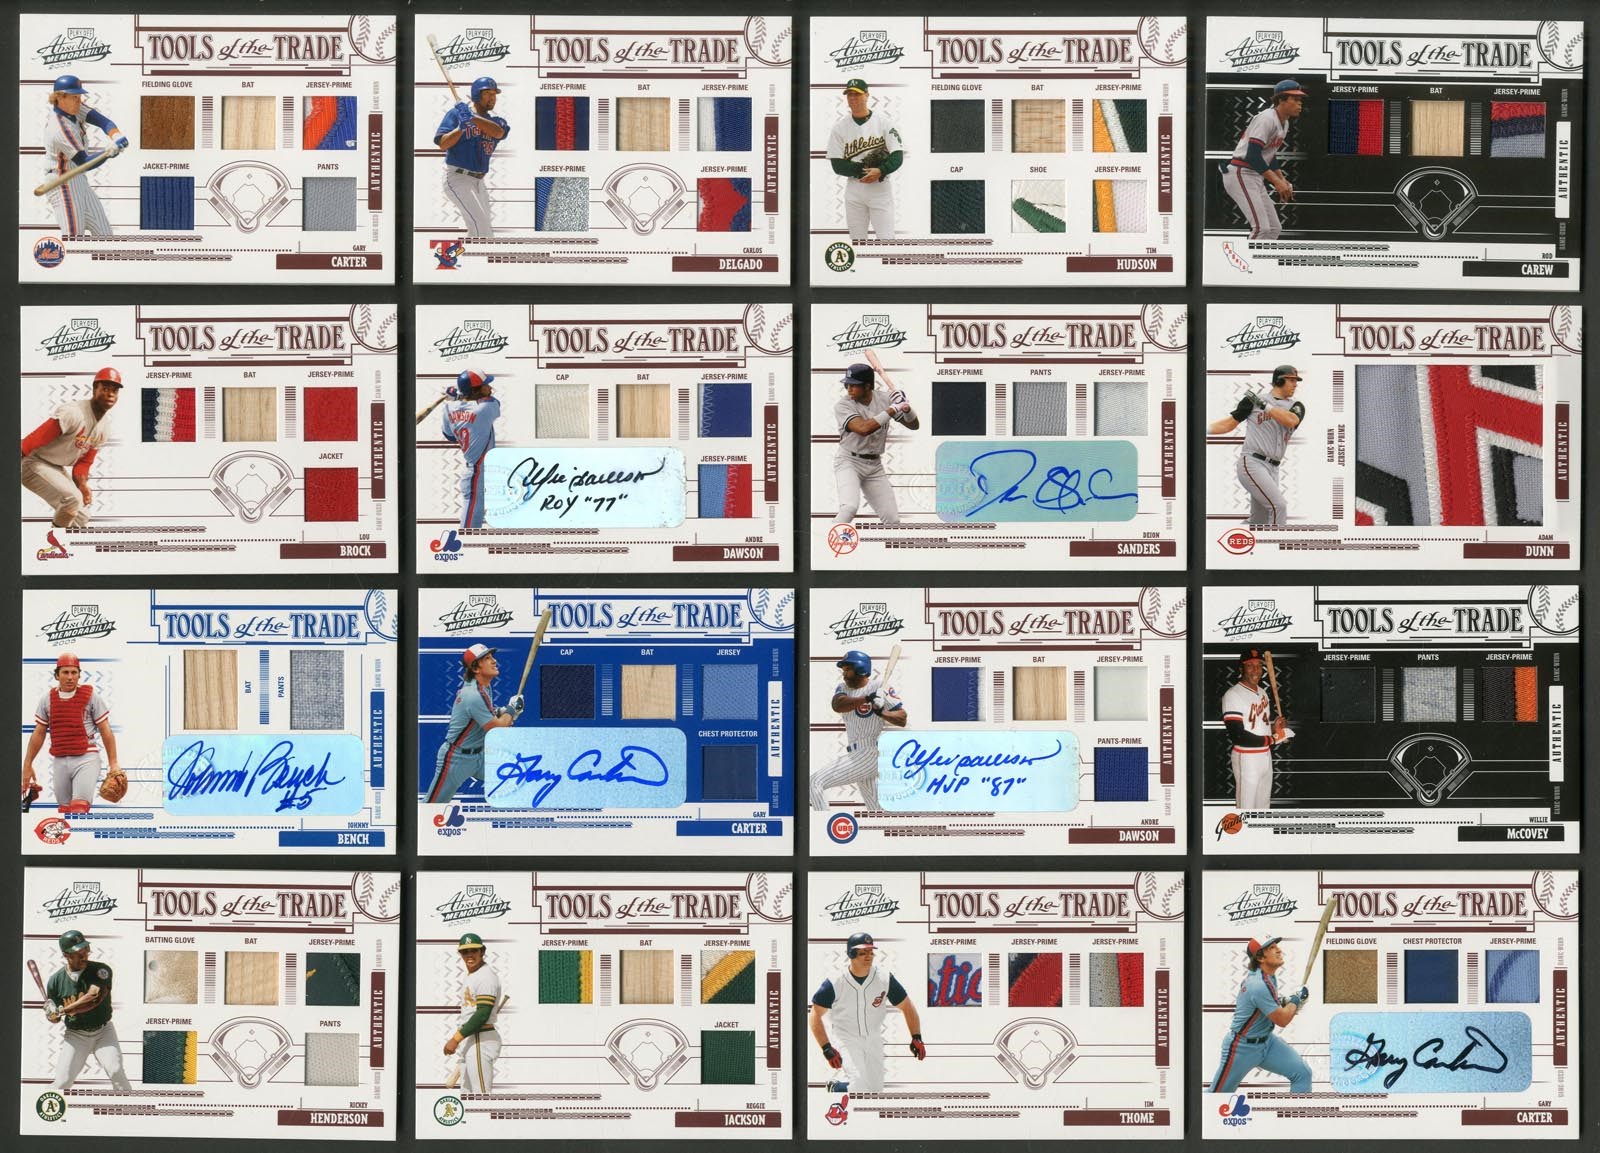 Baseball and Trading Cards - Incredible 2005 Absolute Memorabilia Tools of the Trade Autograph & Multi-Patch Collection (137 Cards, 570 Swatches, 37 Autos)